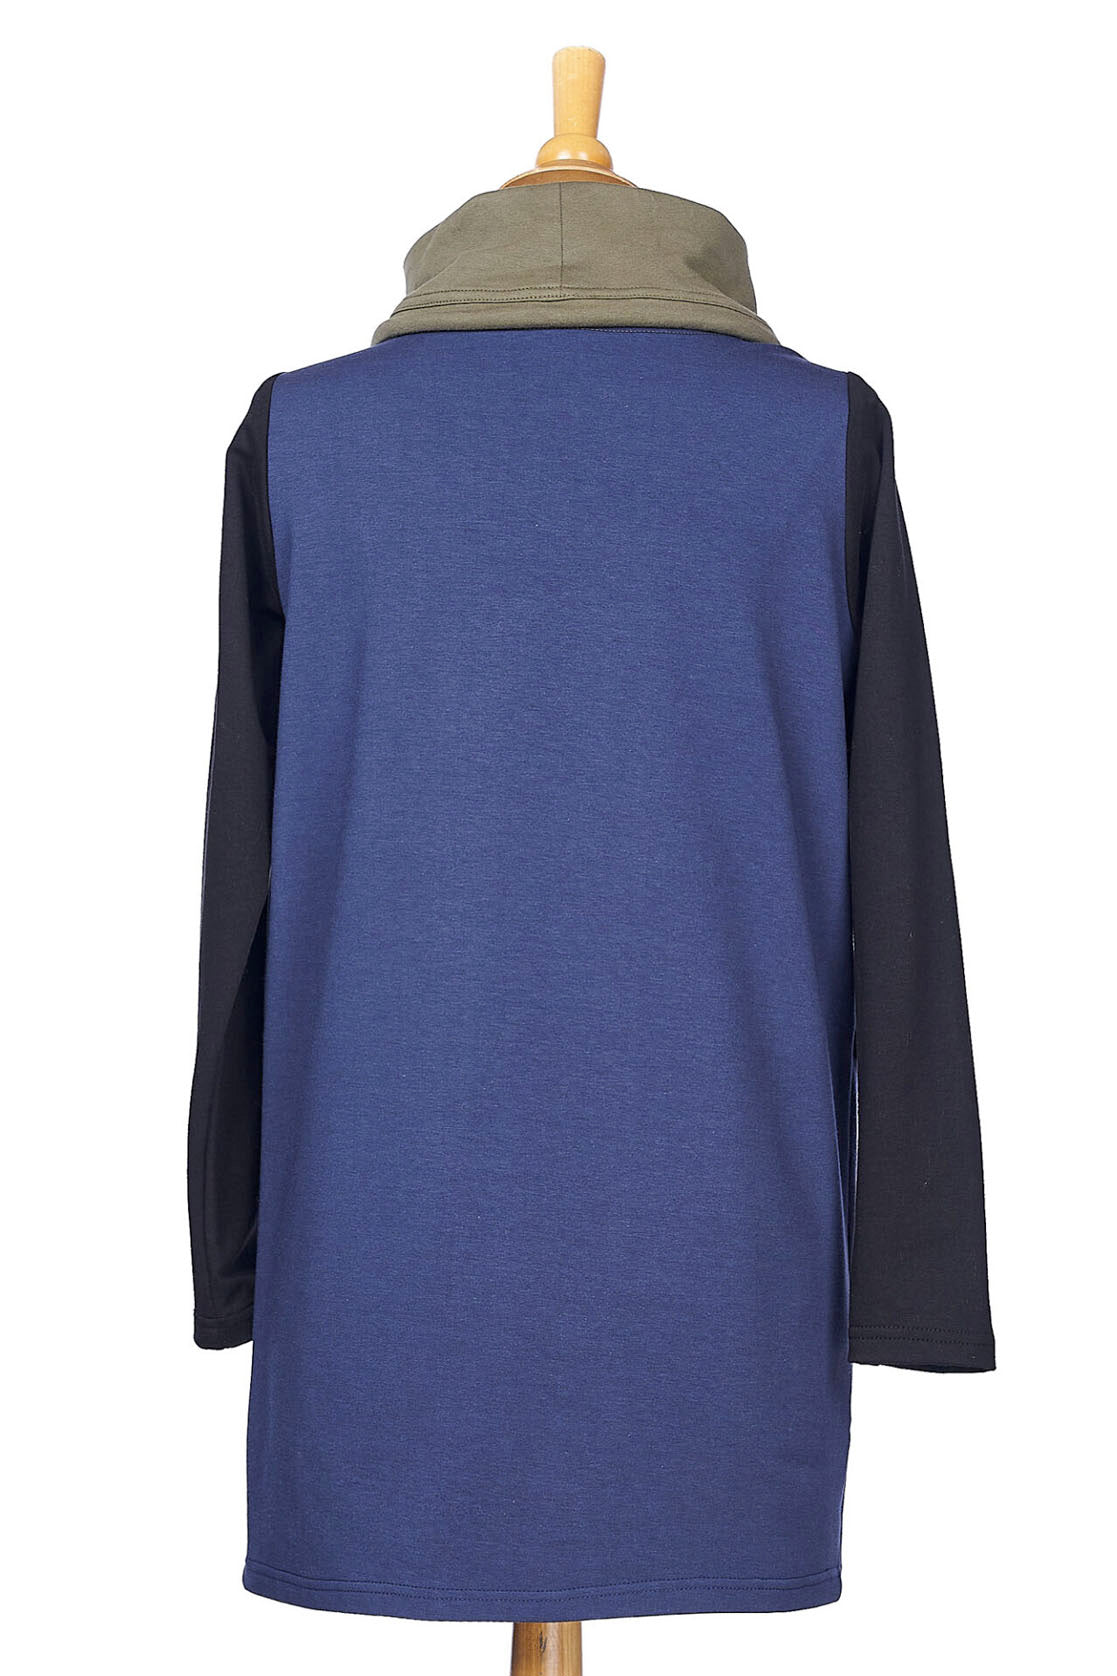 Appalaches Tunic by Rien ne se Perd, Khaki, back view, cowl neck, drawstrings at neck, asymmetrical colour blocking, long sleeves, mid-thigh length, bamboo, cotton, sizes XS to XXL, made in Montreal